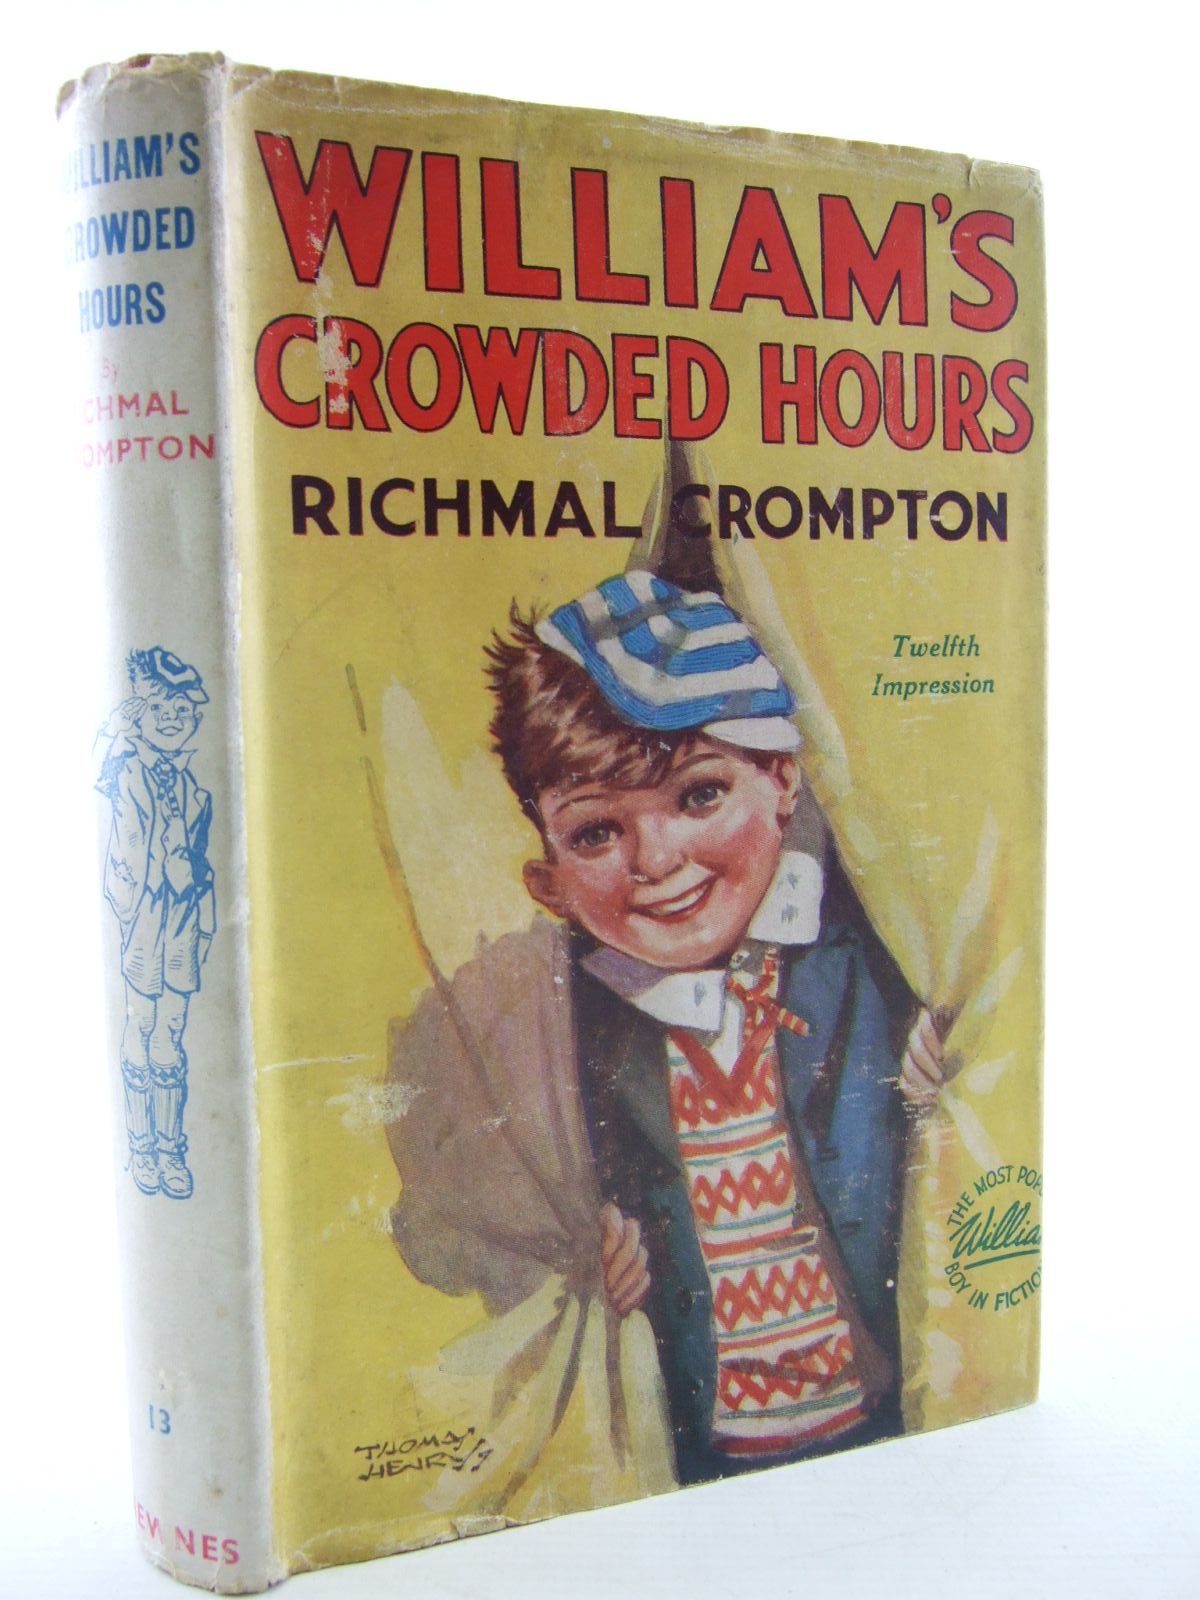 Cover of WILLIAM'S CROWDED HOURS by Richmal Crompton